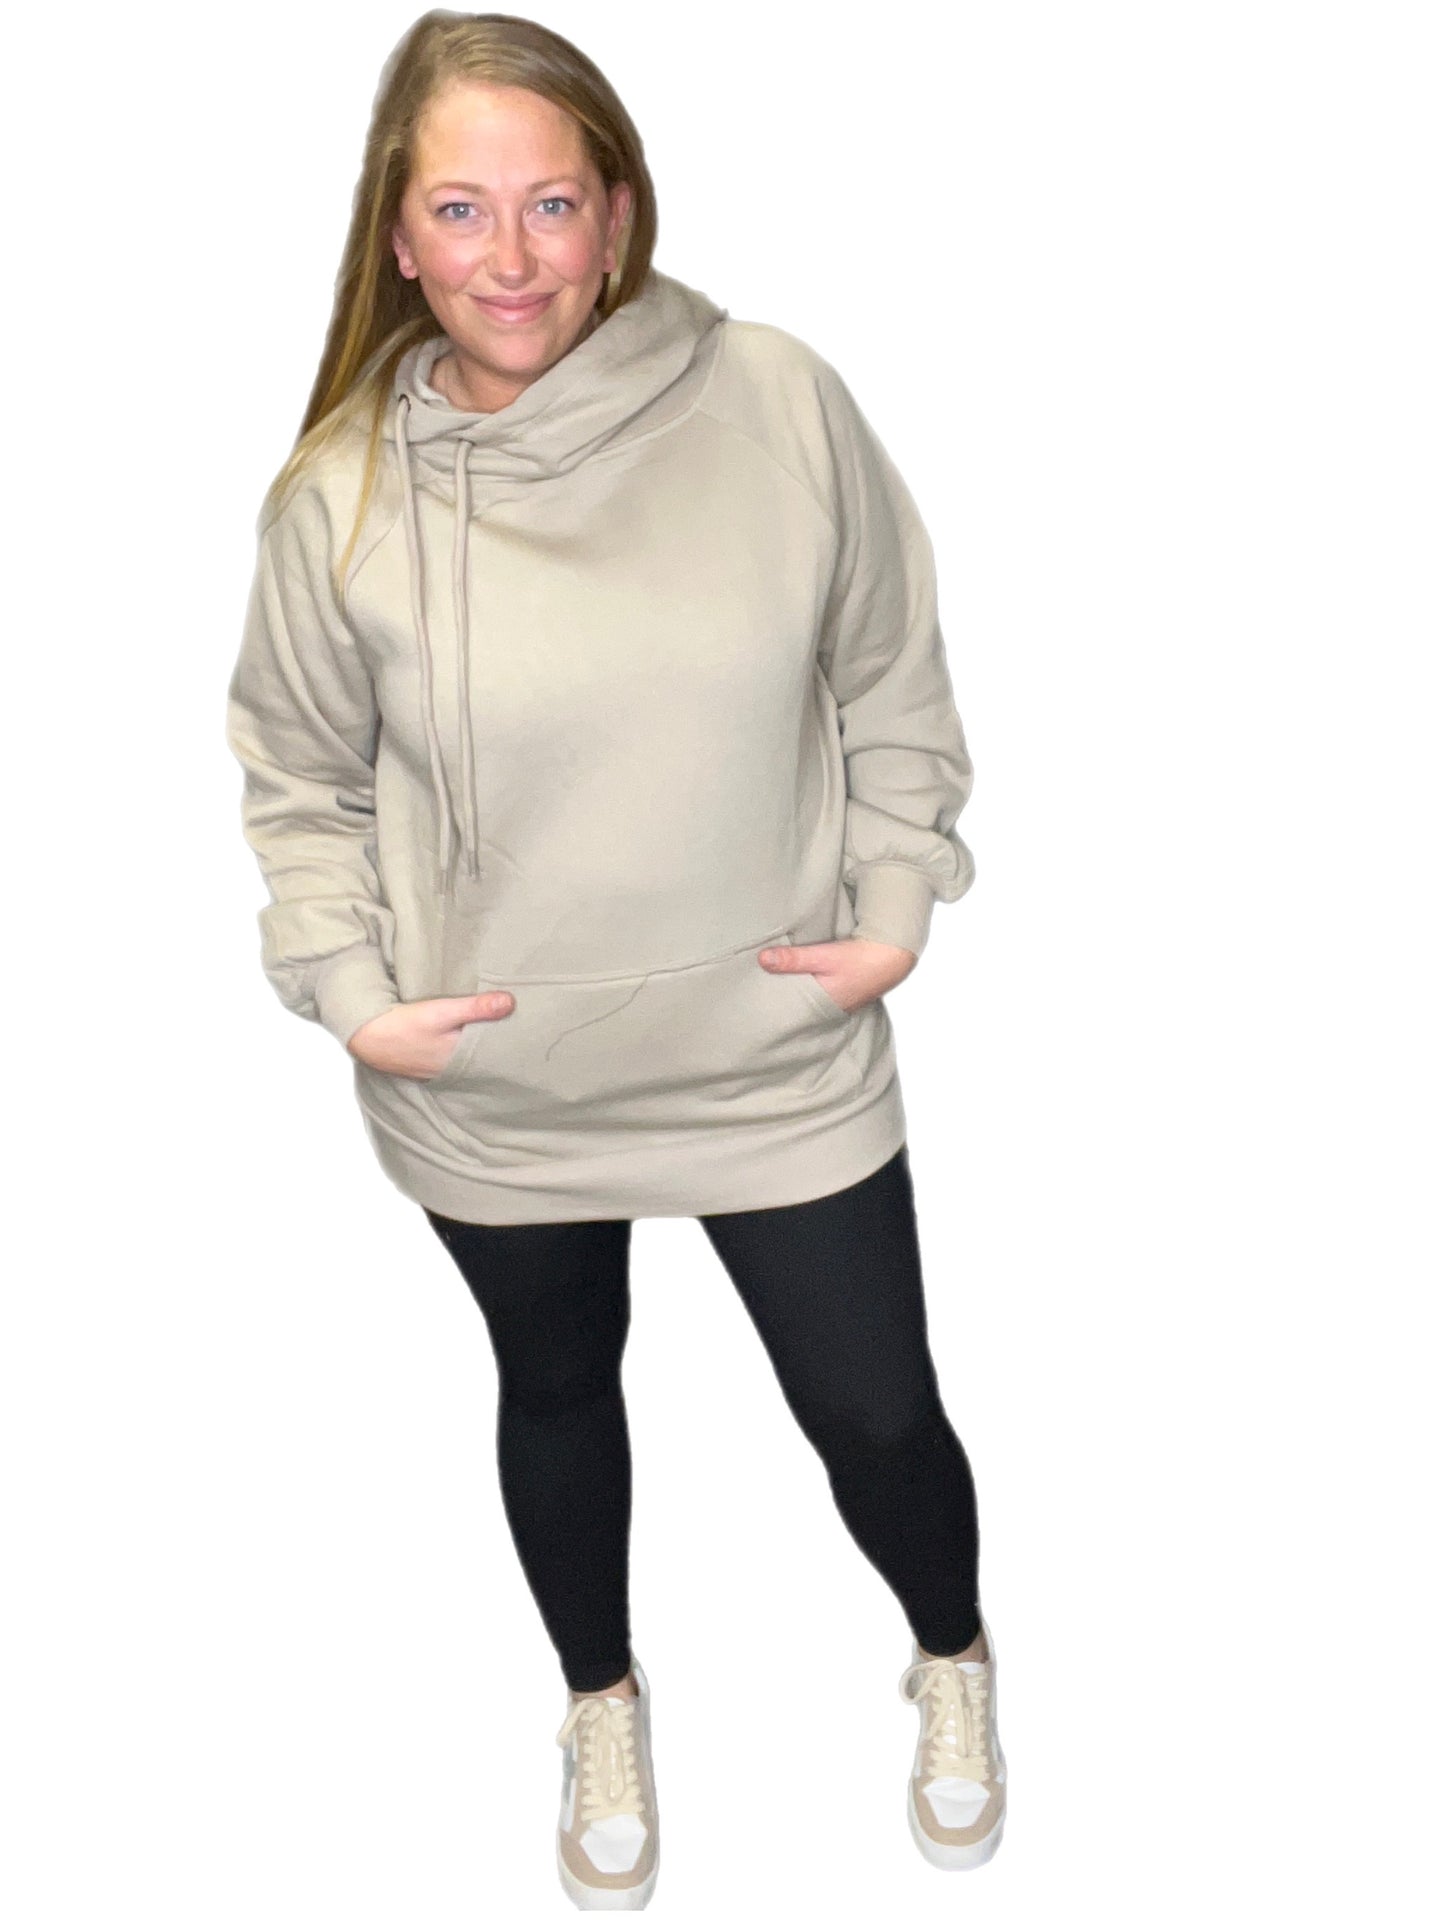 DOORBUSTER! Sports Mom On The Go Hoodie - 4 COLORS